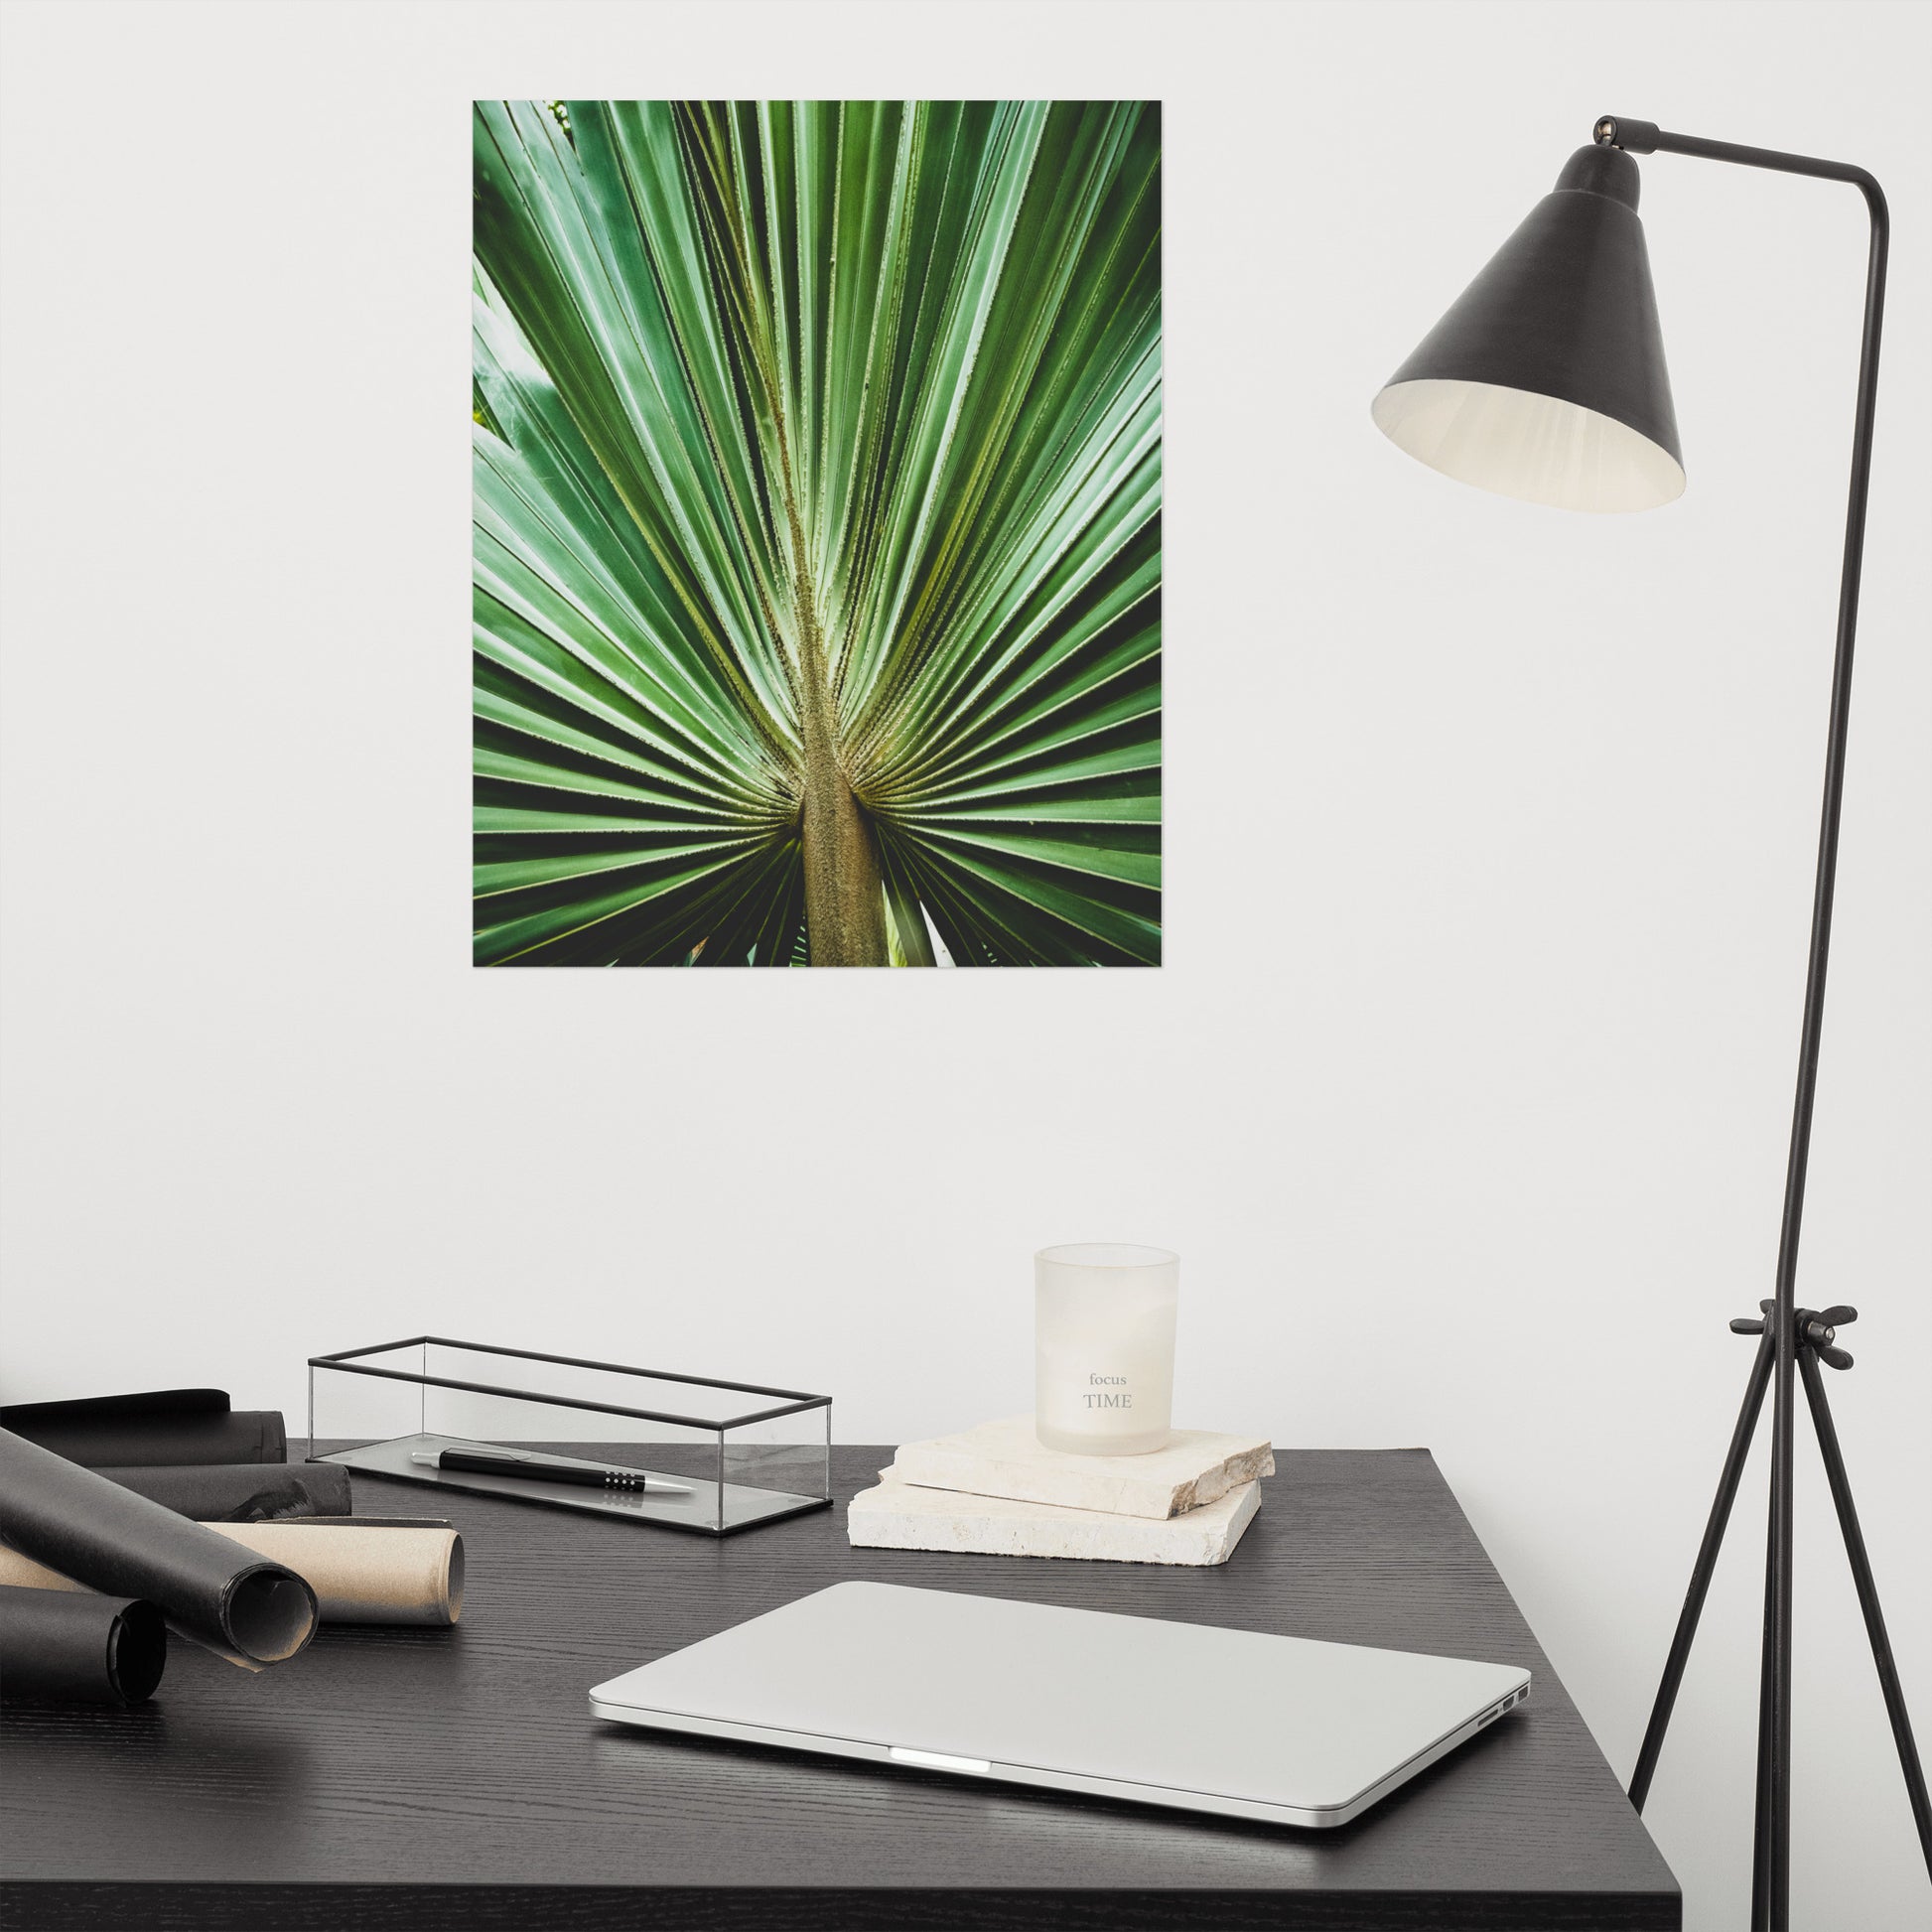 Pediatric Clinic Wall Decor: Aged and Colorized Wide Palm Leaves 2 - Botanical / Plants / Nature Photograph Loose / Unframed Wall Art Print - Artwork